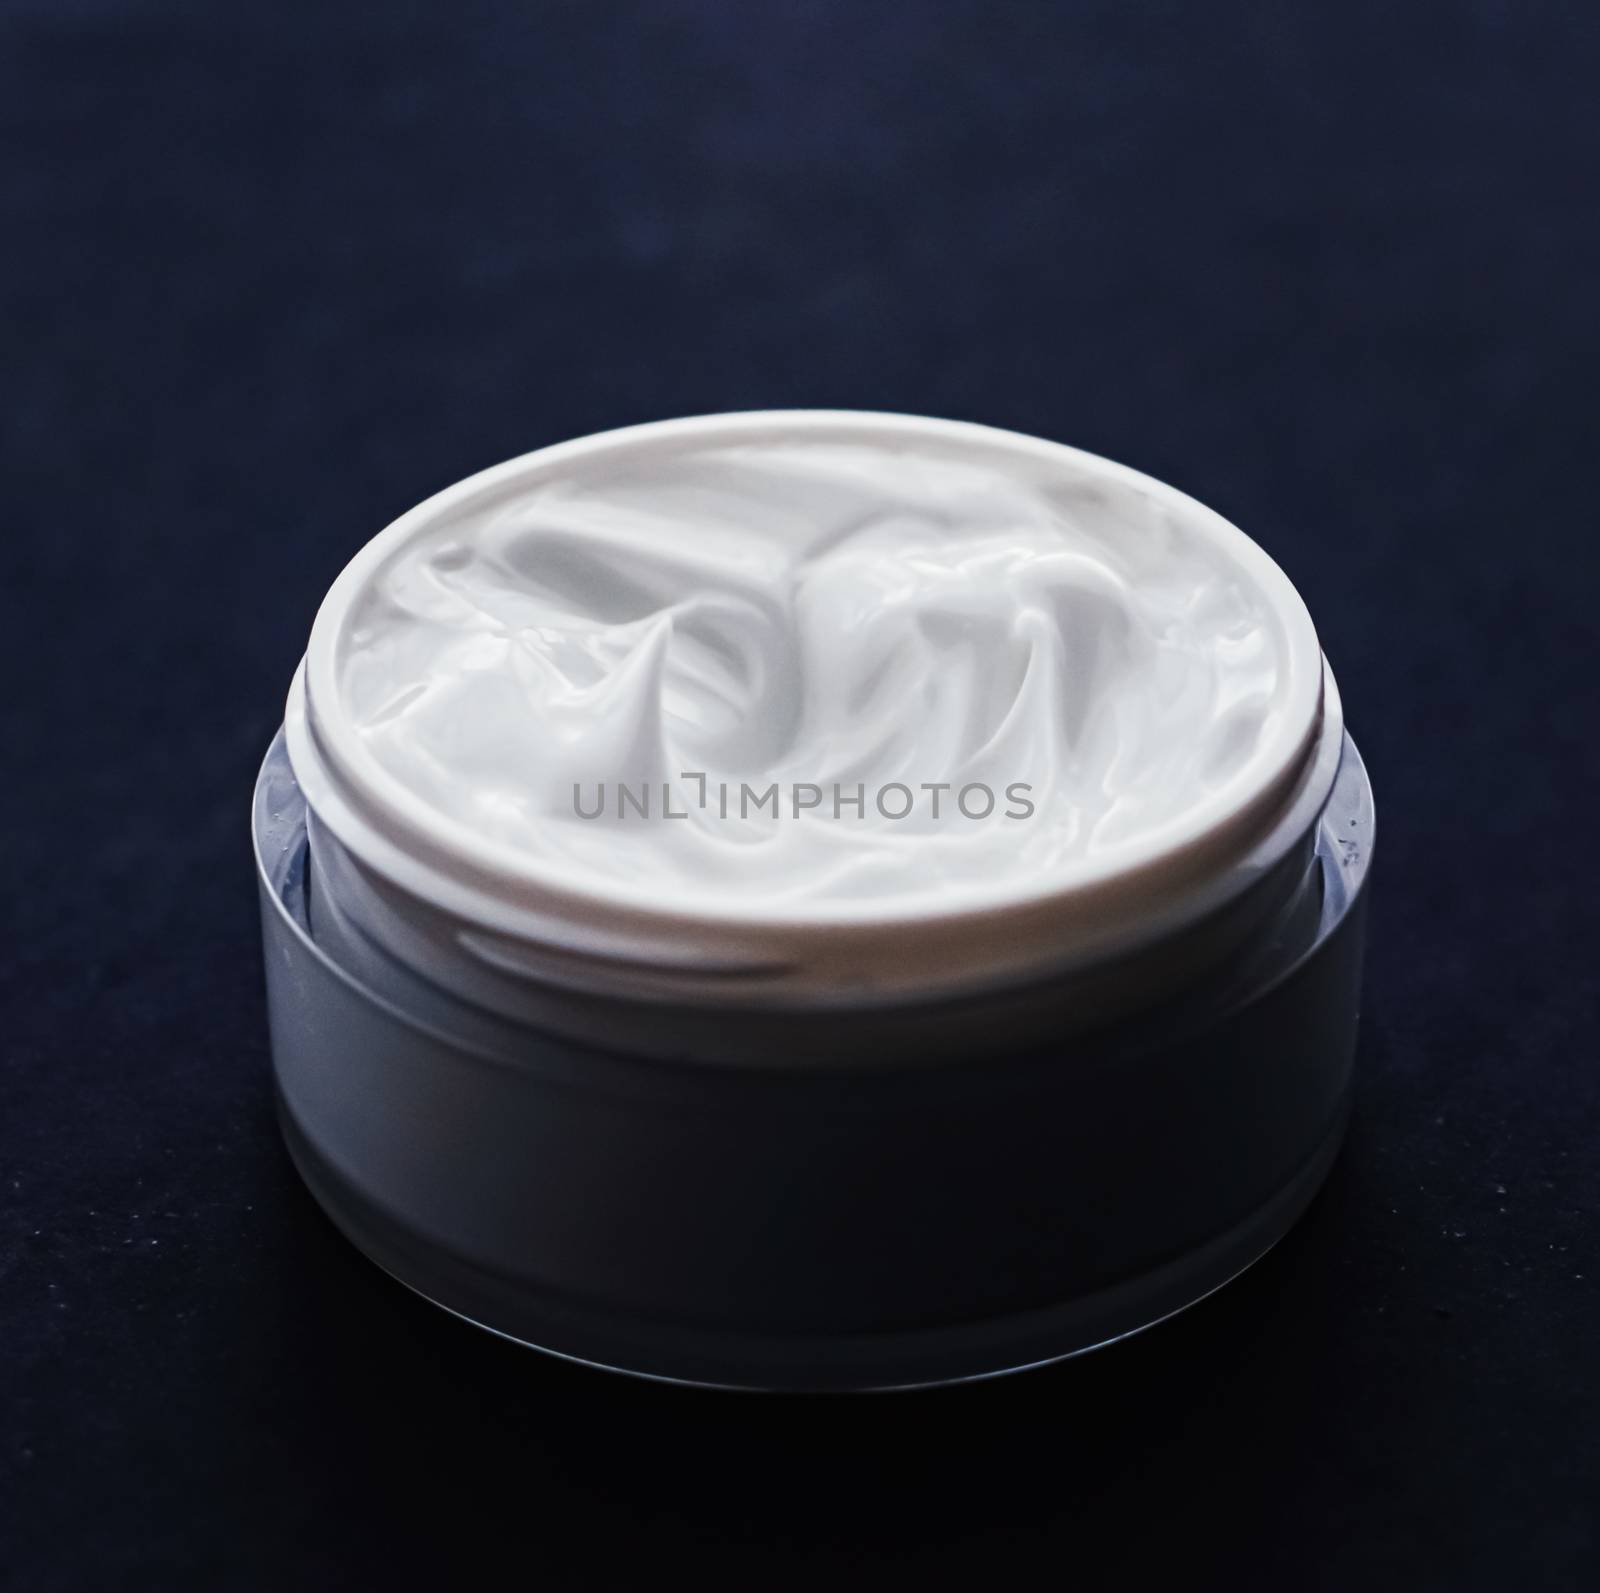 Face cream moisturizer, luxury skincare and anti-aging cosmetics by Anneleven